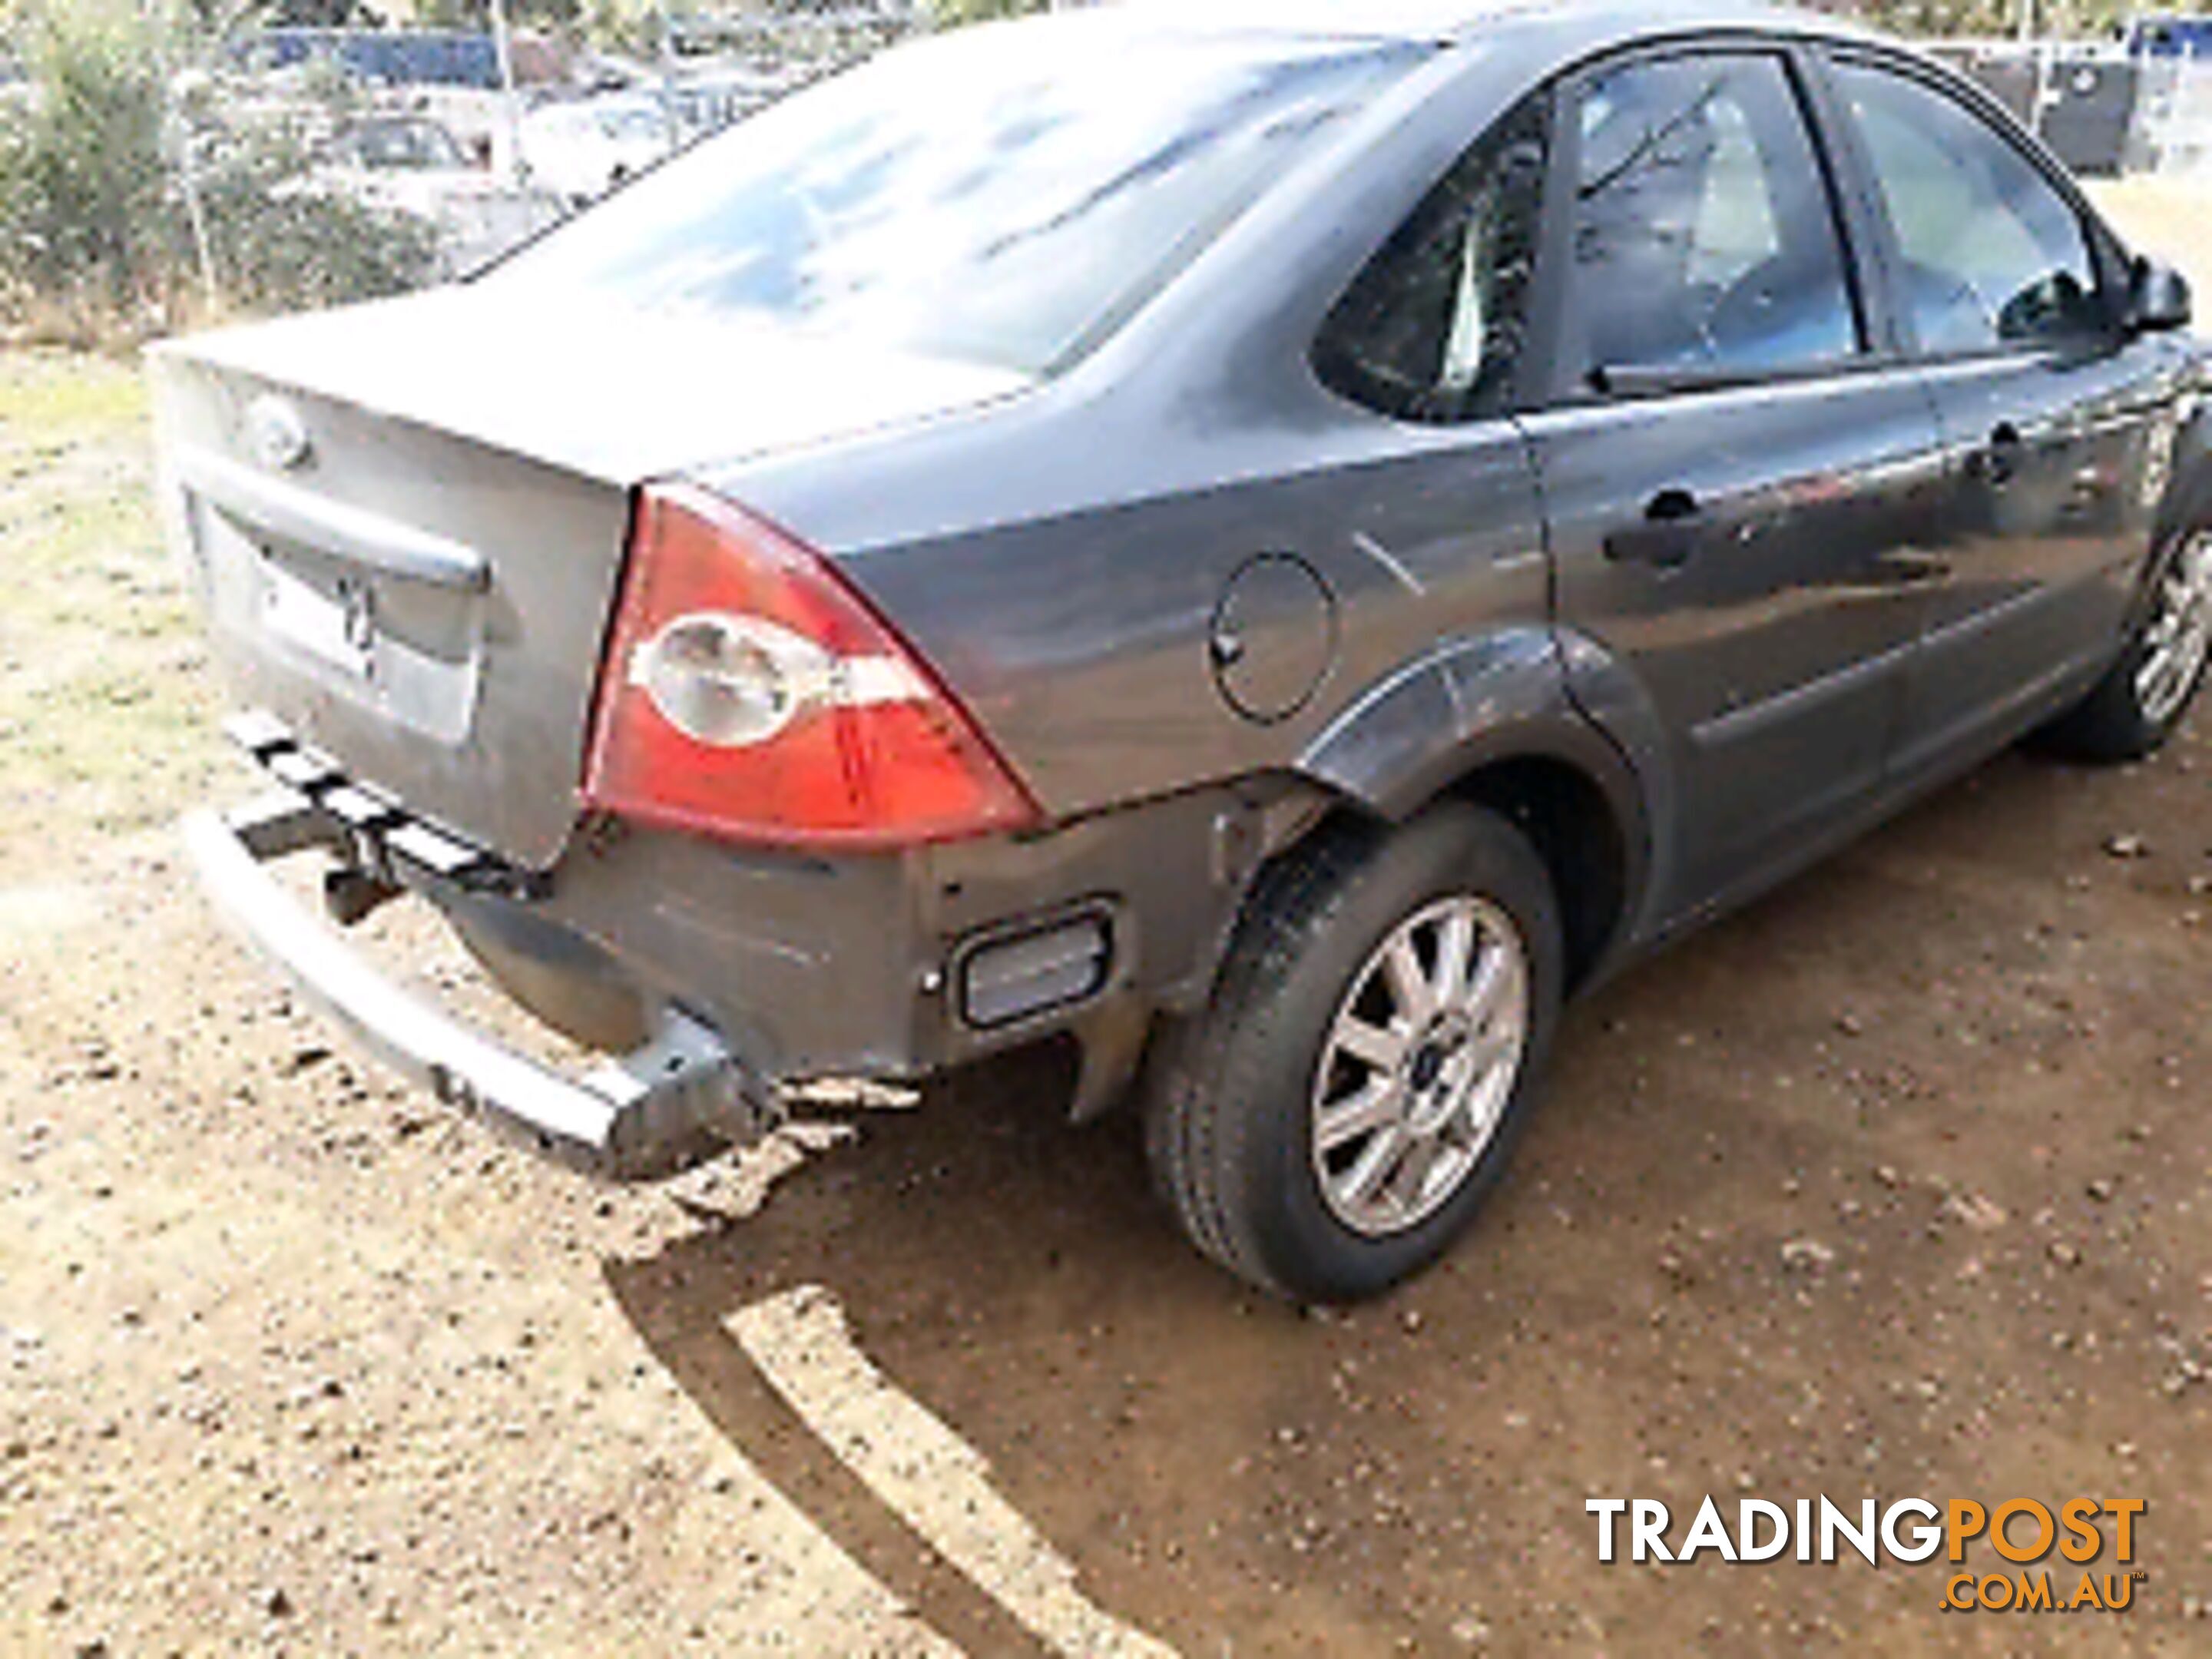 2006 Ford Focus Wrecking Now